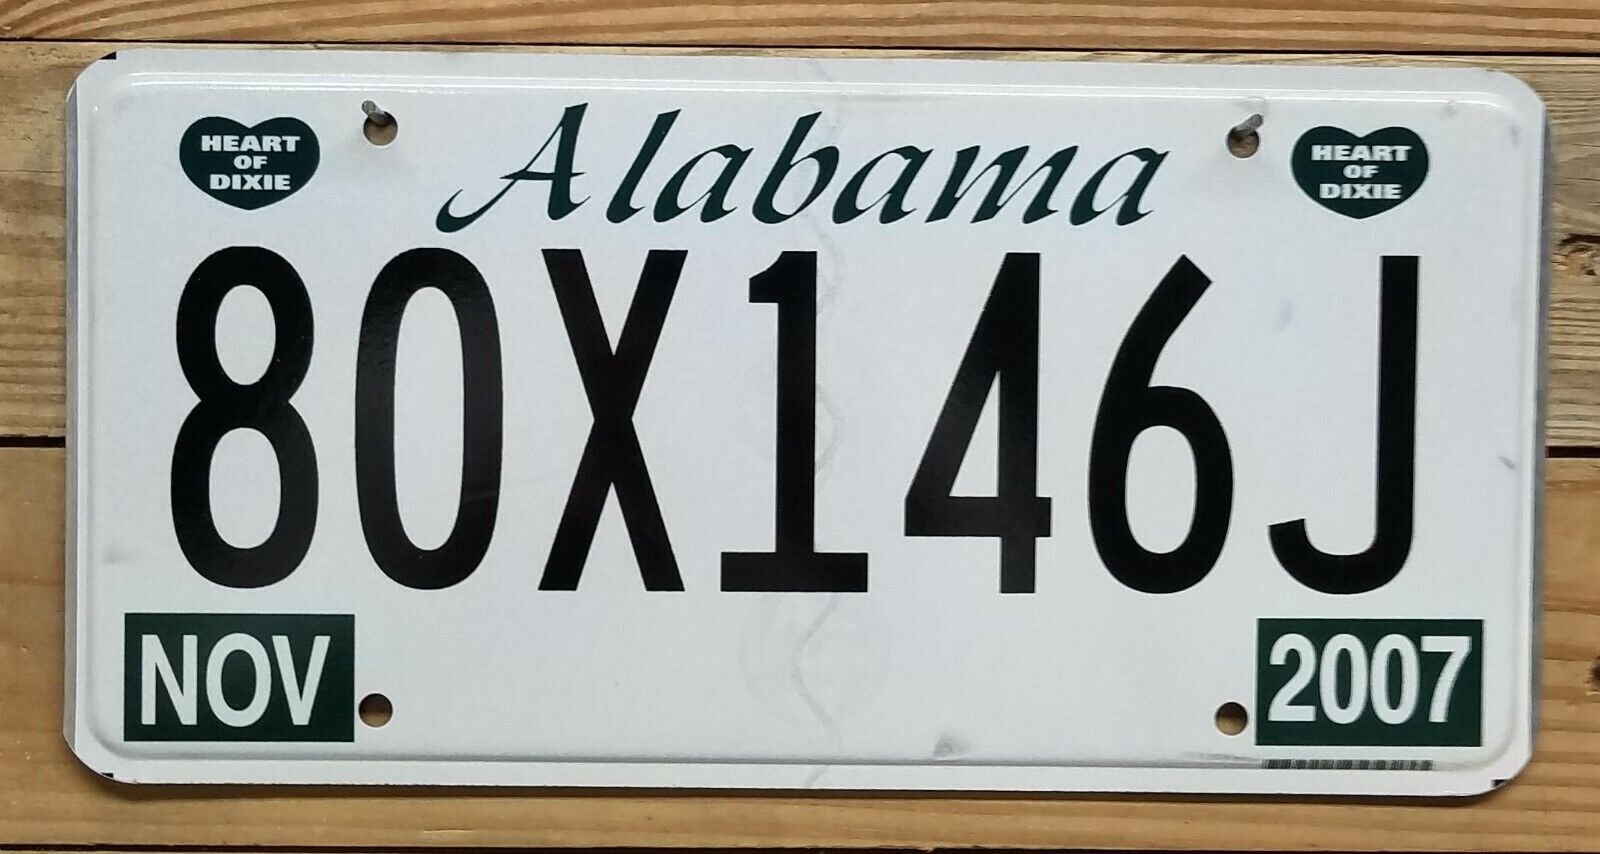 Alabama Expired 2007 "truck For Hire" License Plate ~ 80x146j - Flat